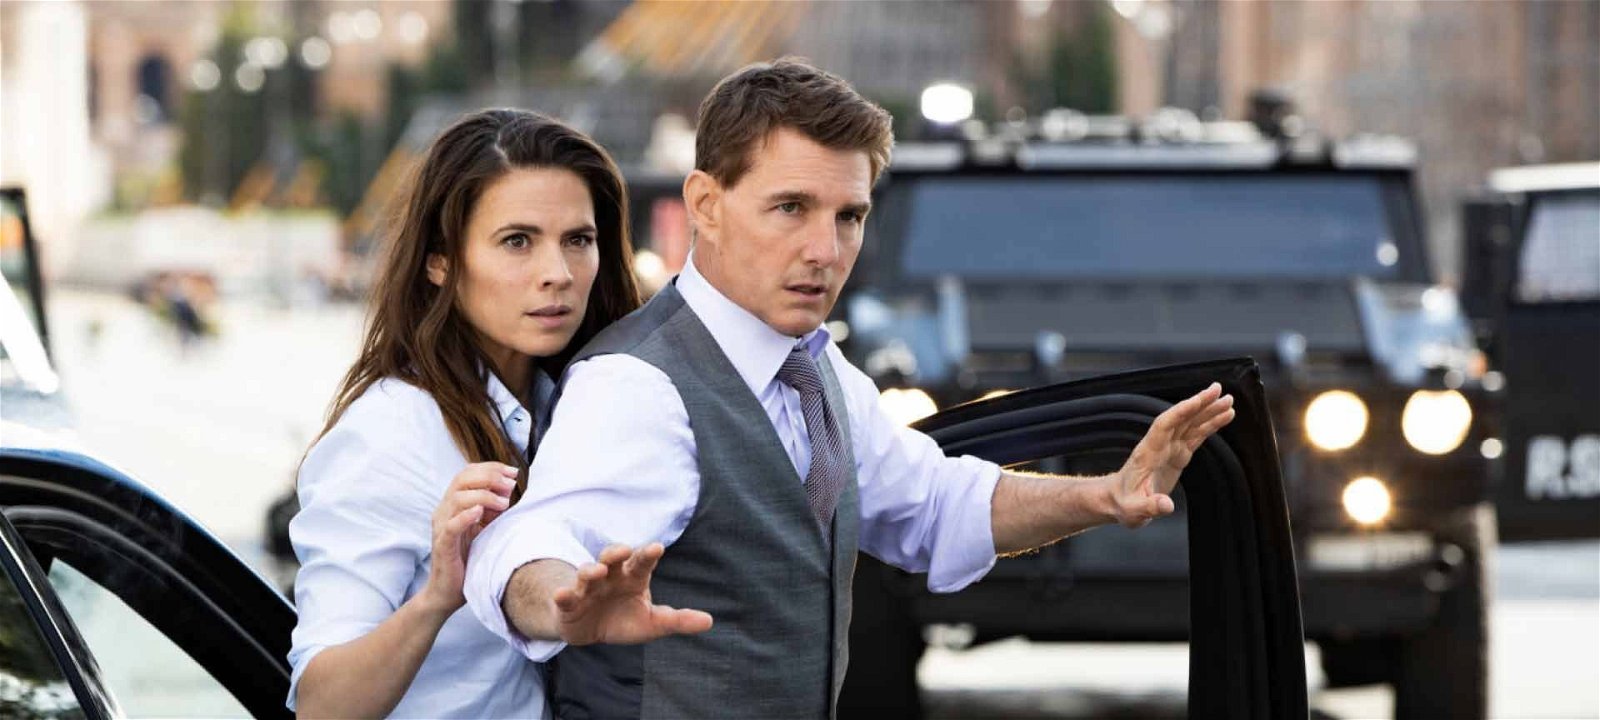 Tom Cruise och Hayley Atwell i Mission: Impossible - Dead Reckoning Part One. Foto: Paramount Pictures.